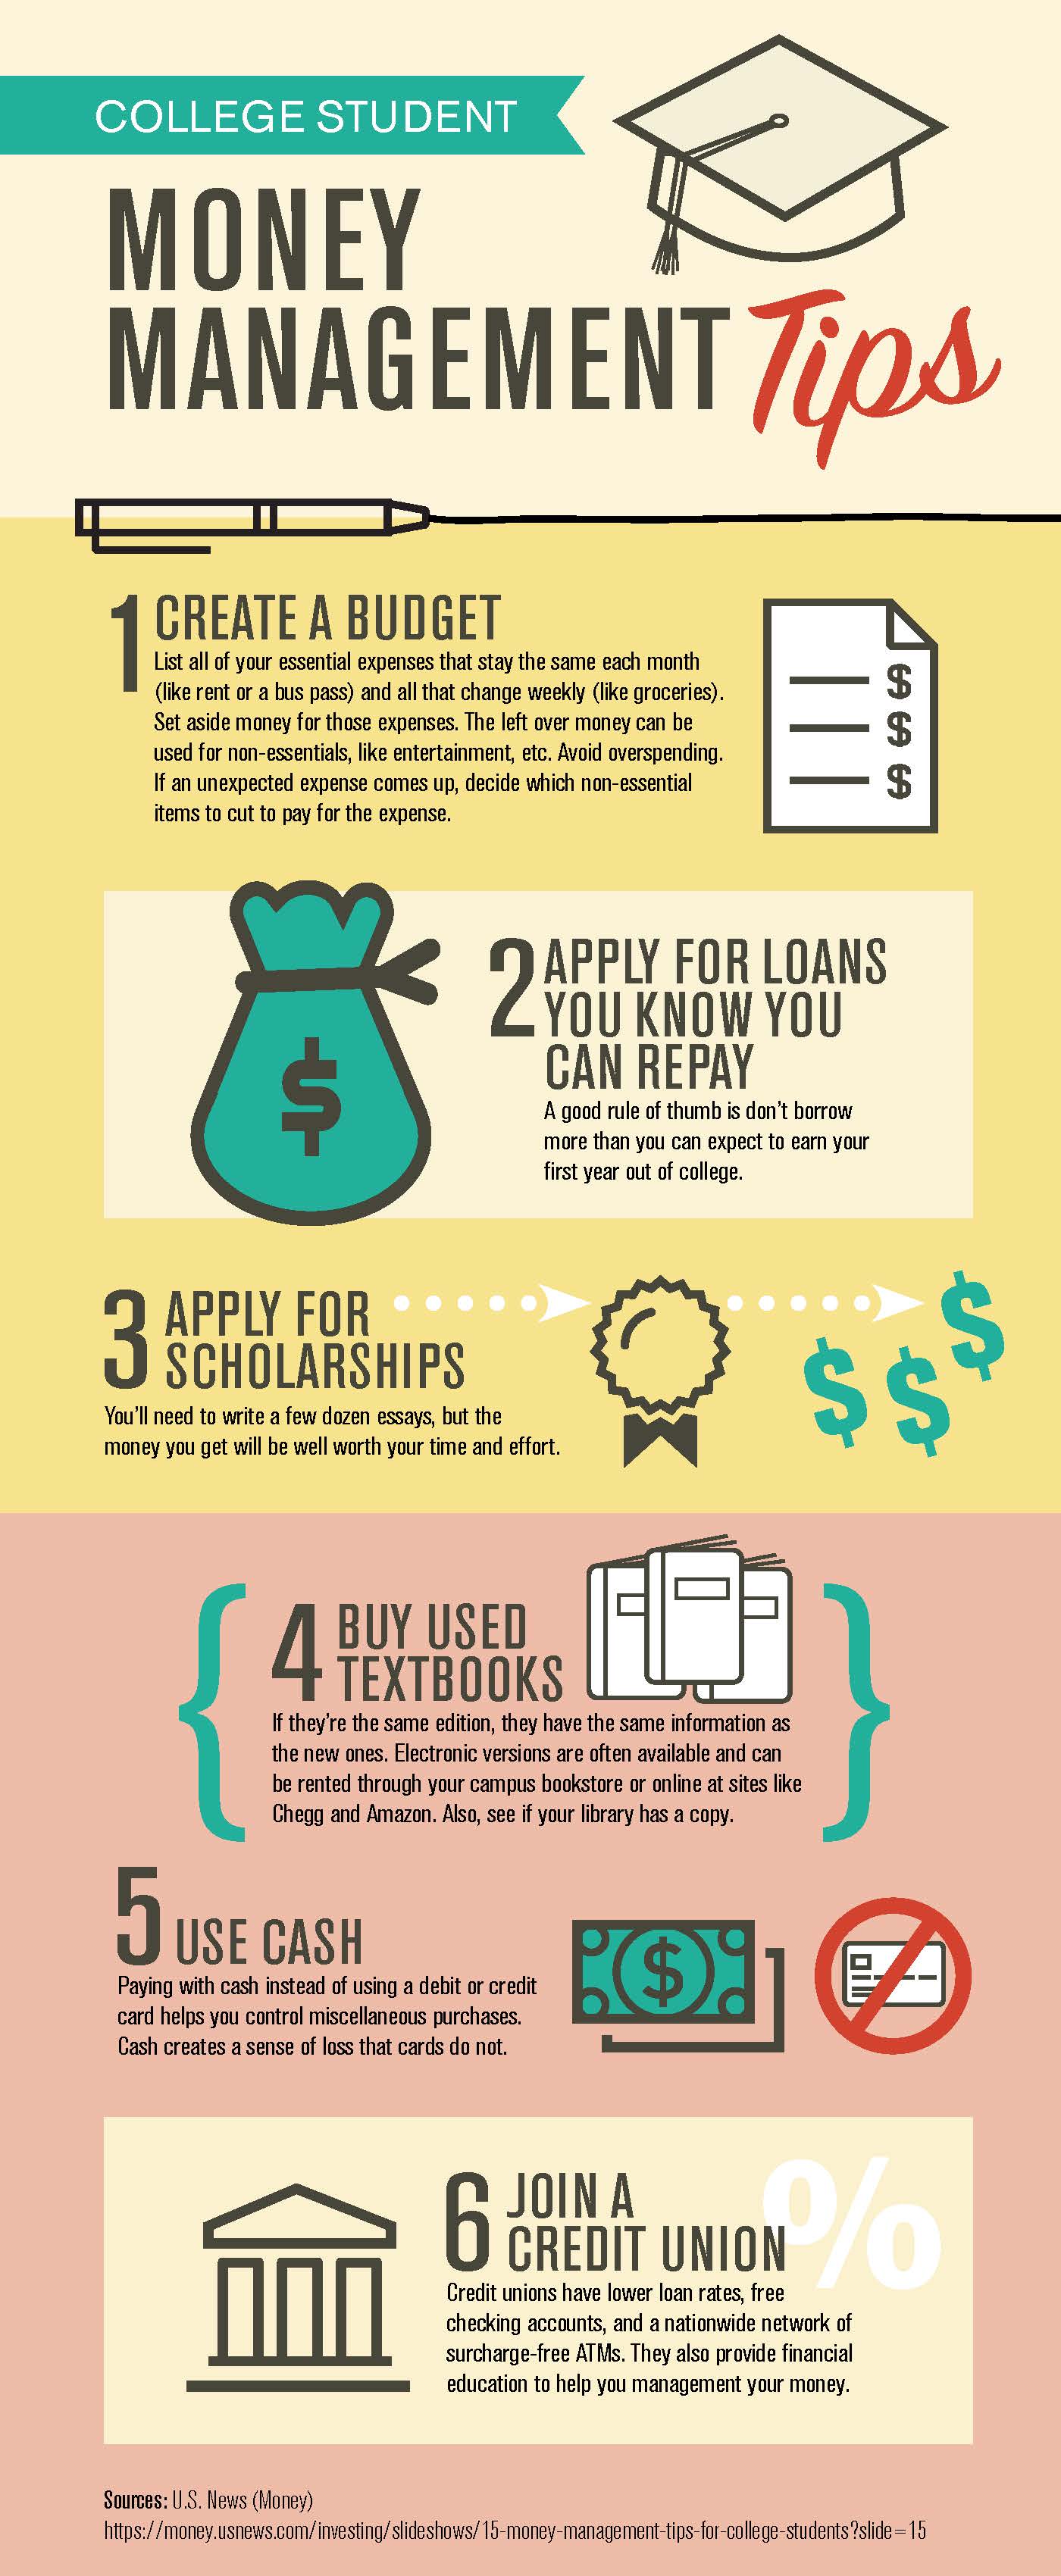 College Money Management Tips Infographic